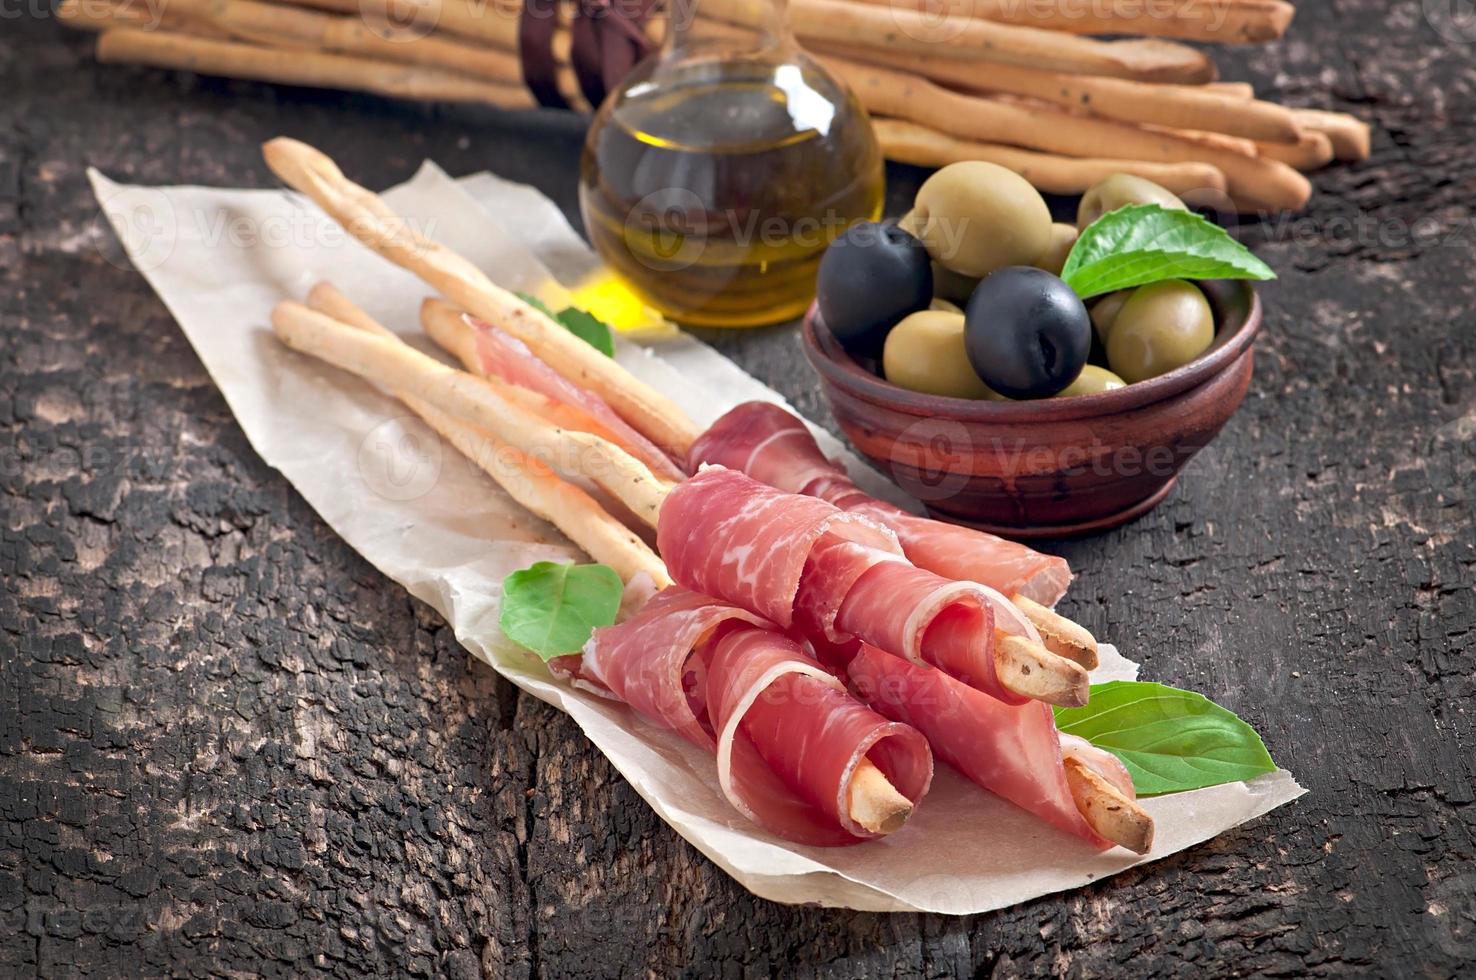 Grissini bread sticks with ham, olives, basil on old wooden background photo